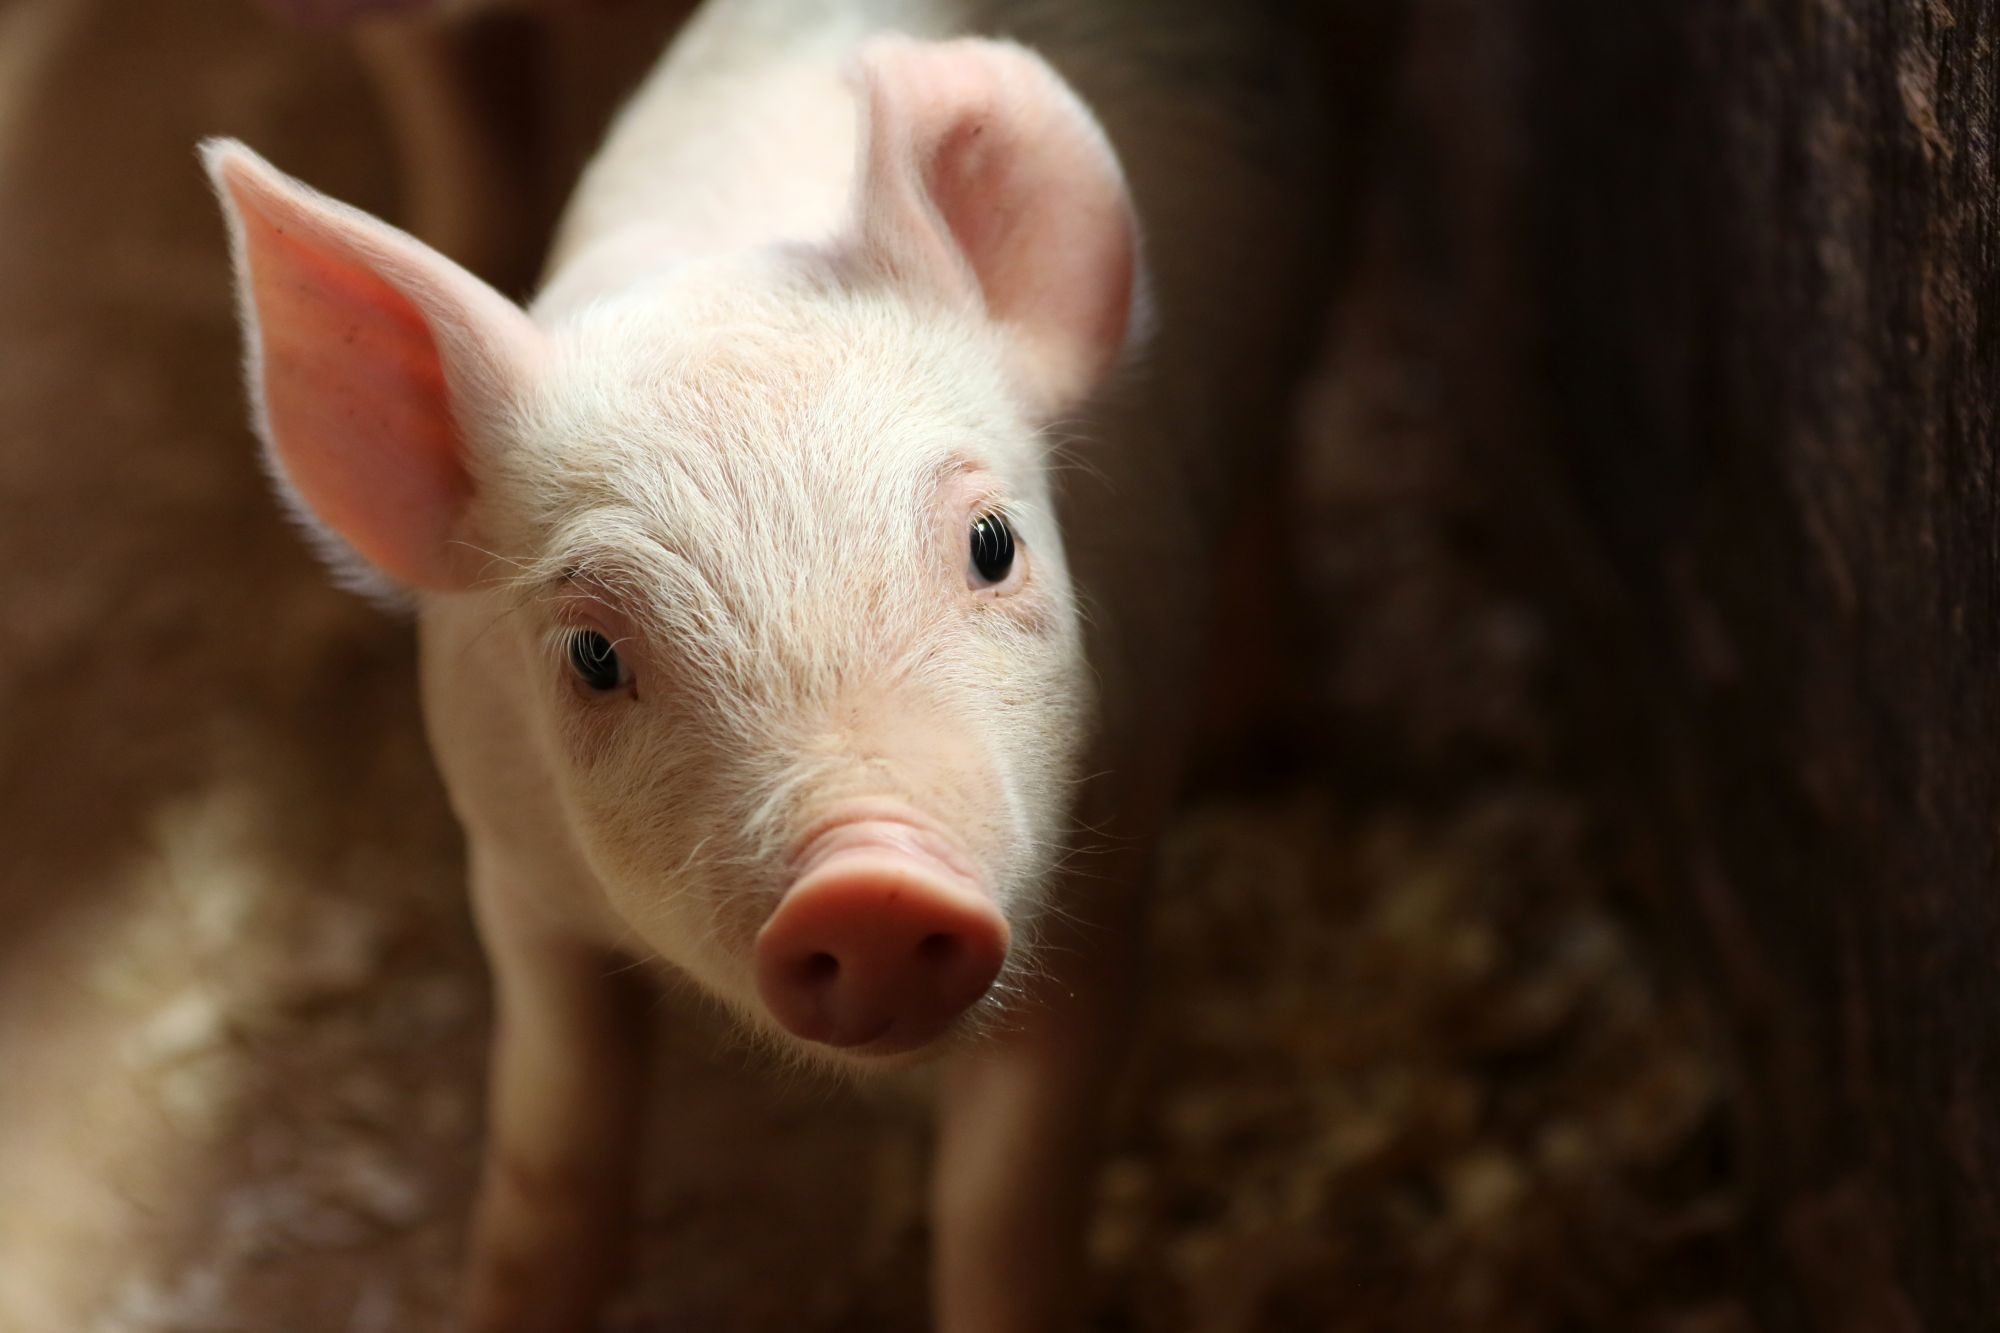 A piglet on a farm in Europe.